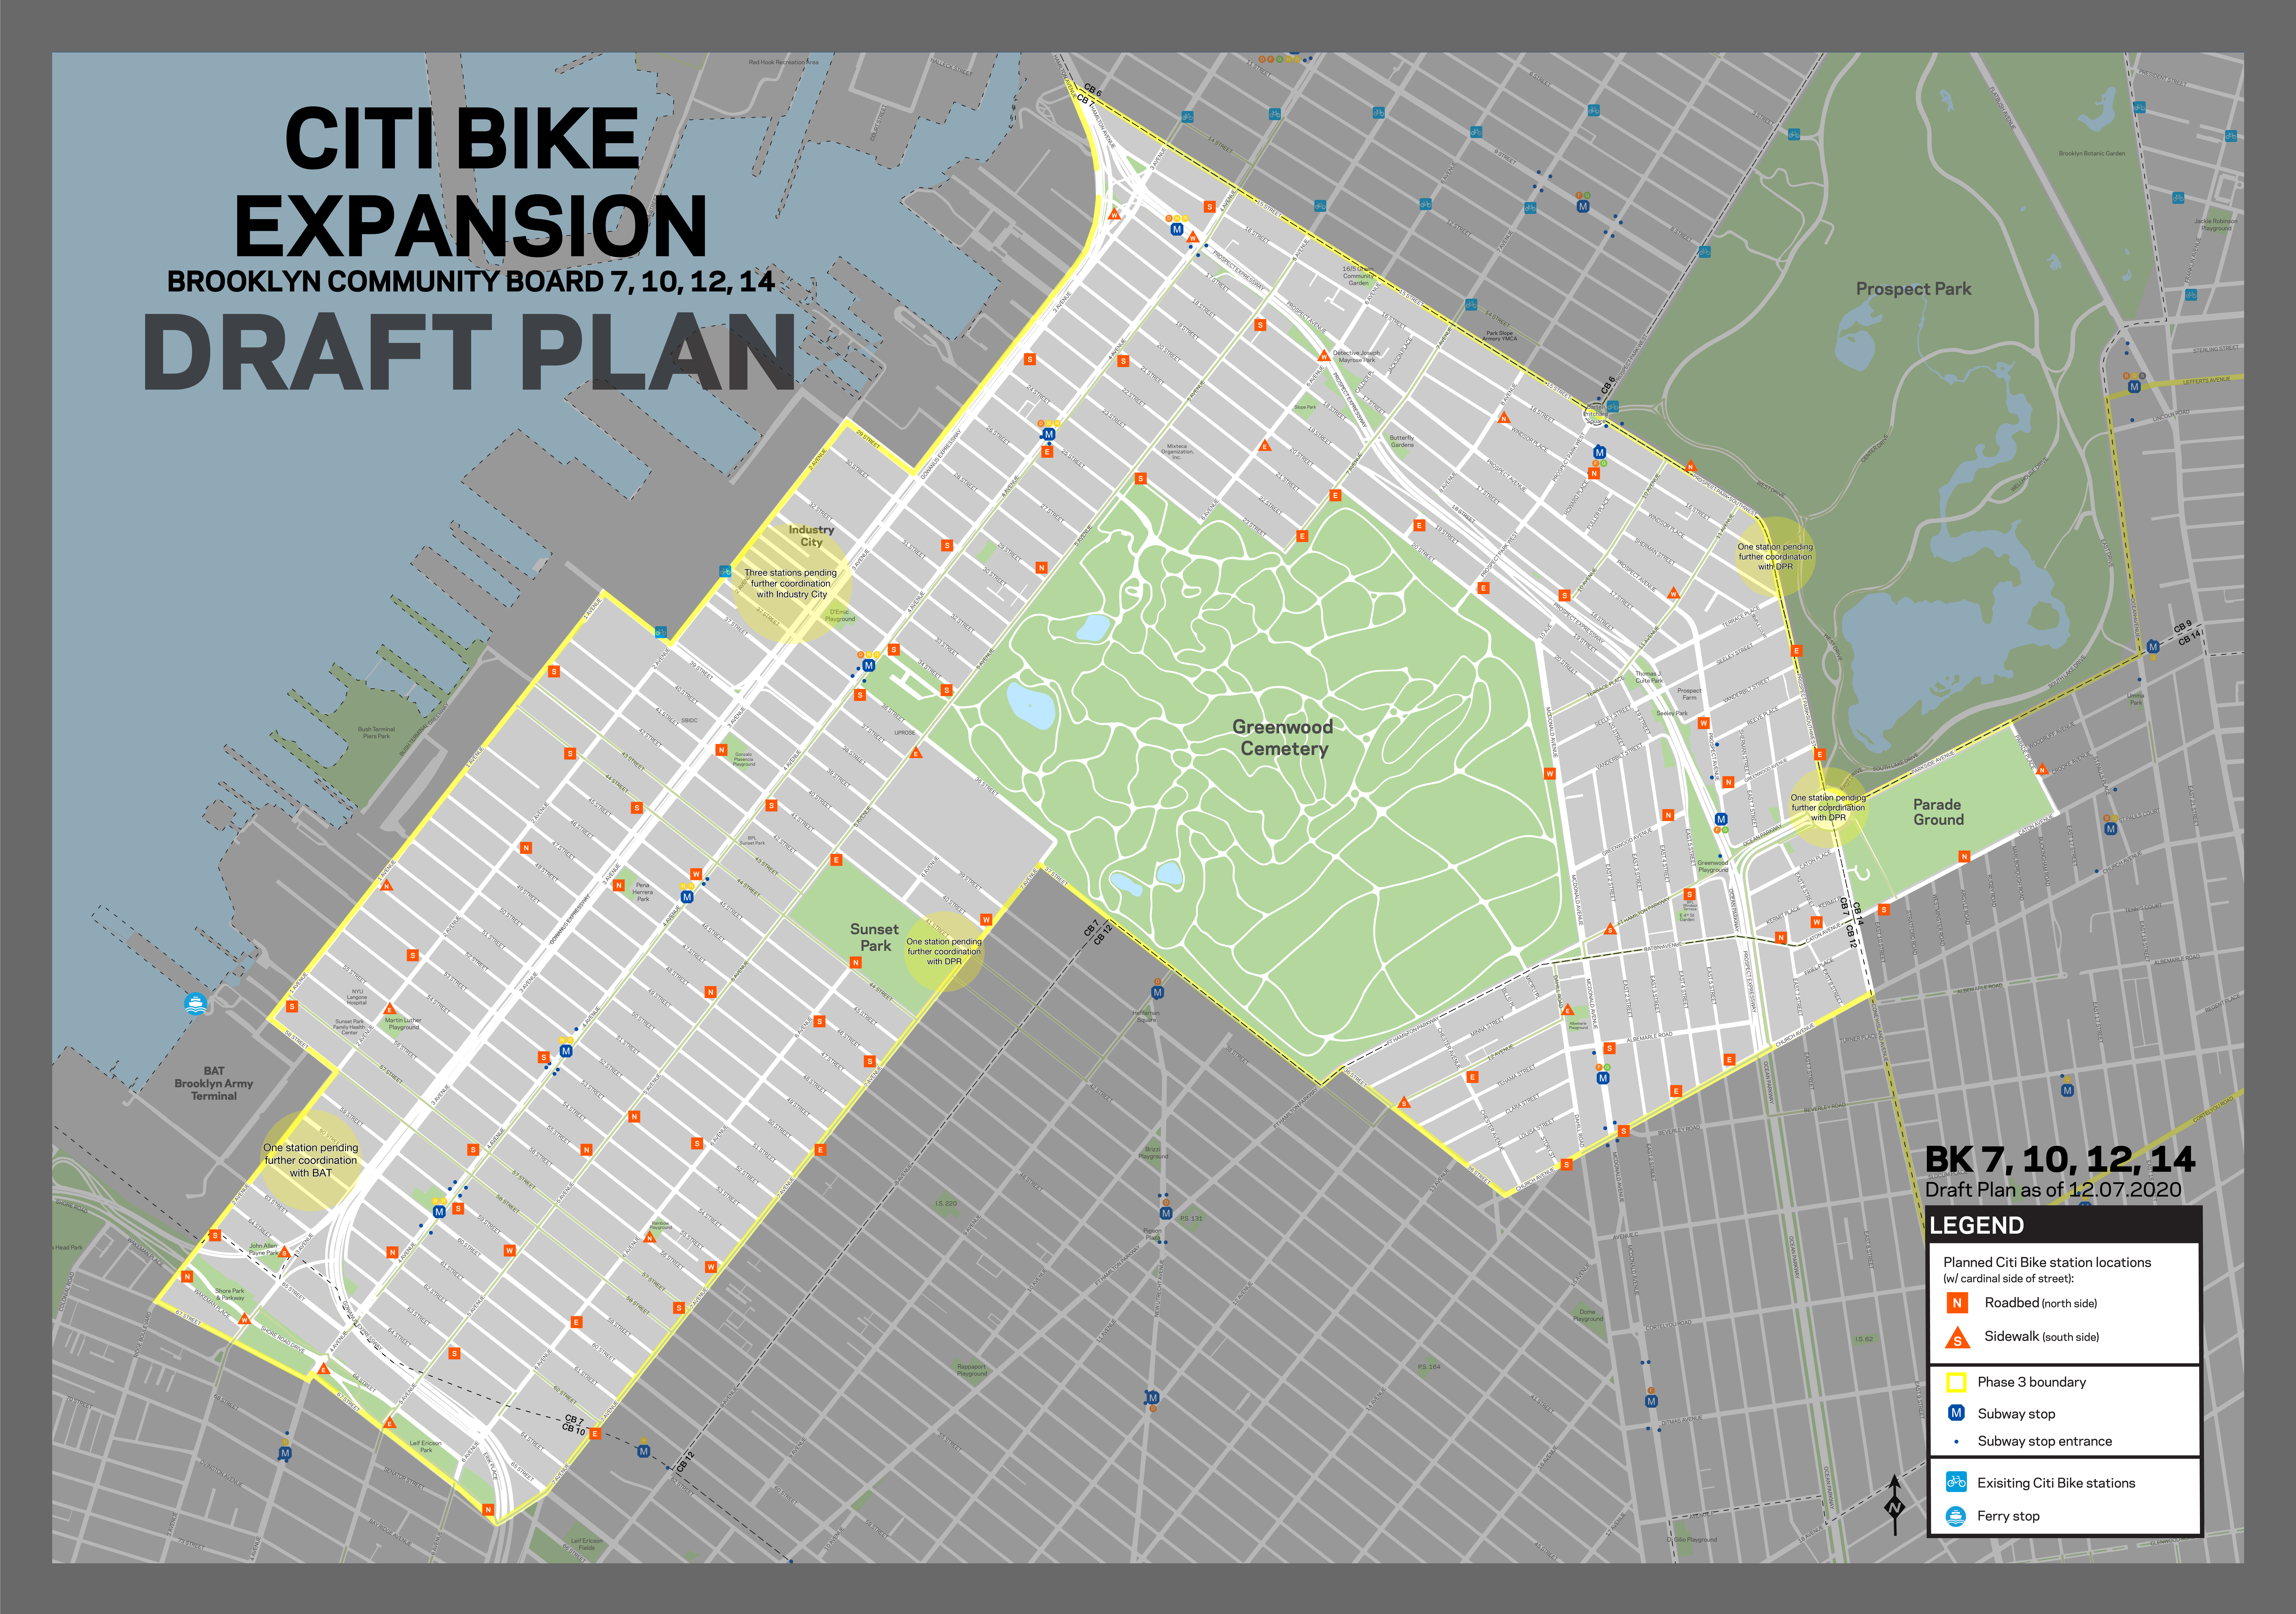 The map of the Citi Bike stations in Brooklyn Community Boards 7, 10, 12, and 14.